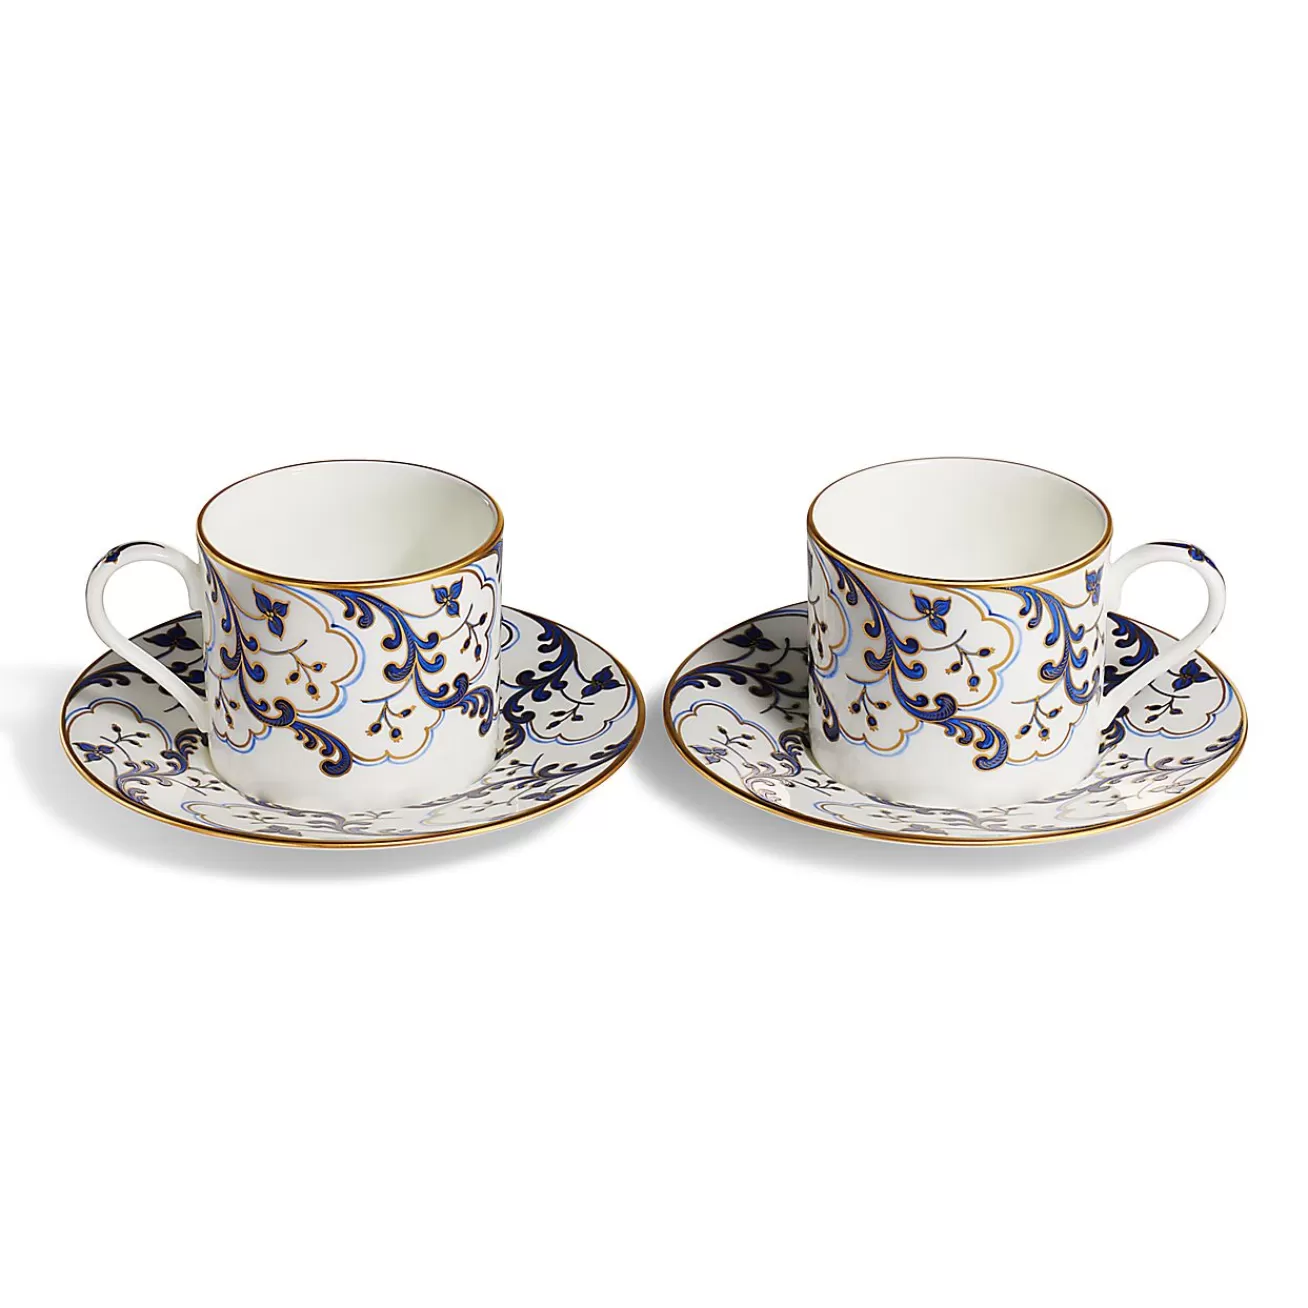 Tiffany & Co. Valse Bleue Teacup and Saucer in Bone China, Set of Two | ^ The Home | Housewarming Gifts